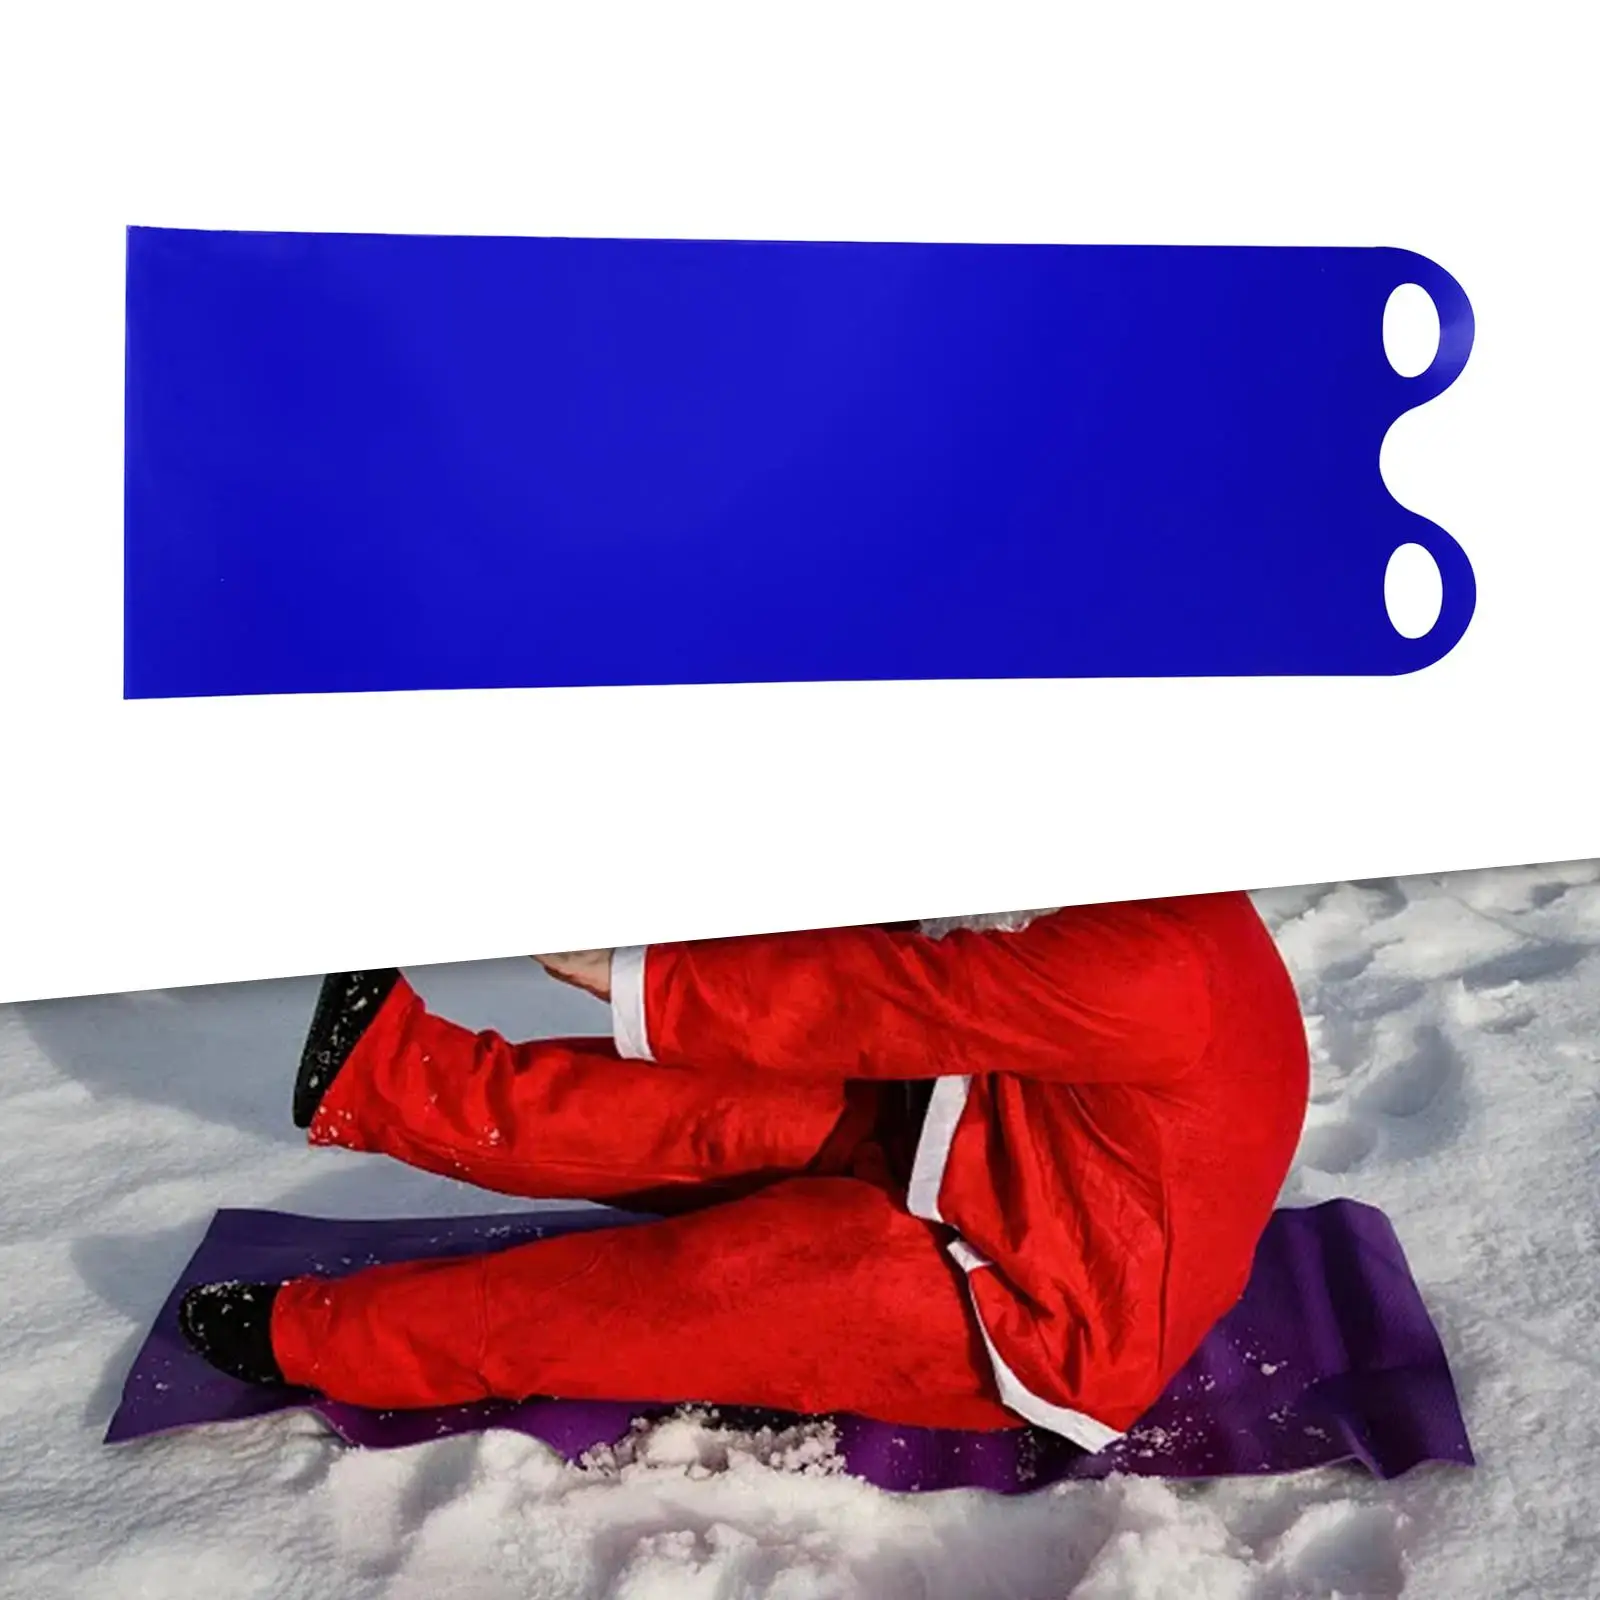 Snow Slide Mat Flying Carpet Snow Sled Roll up Sled for Skiing Winter Toy Outdoor Fun